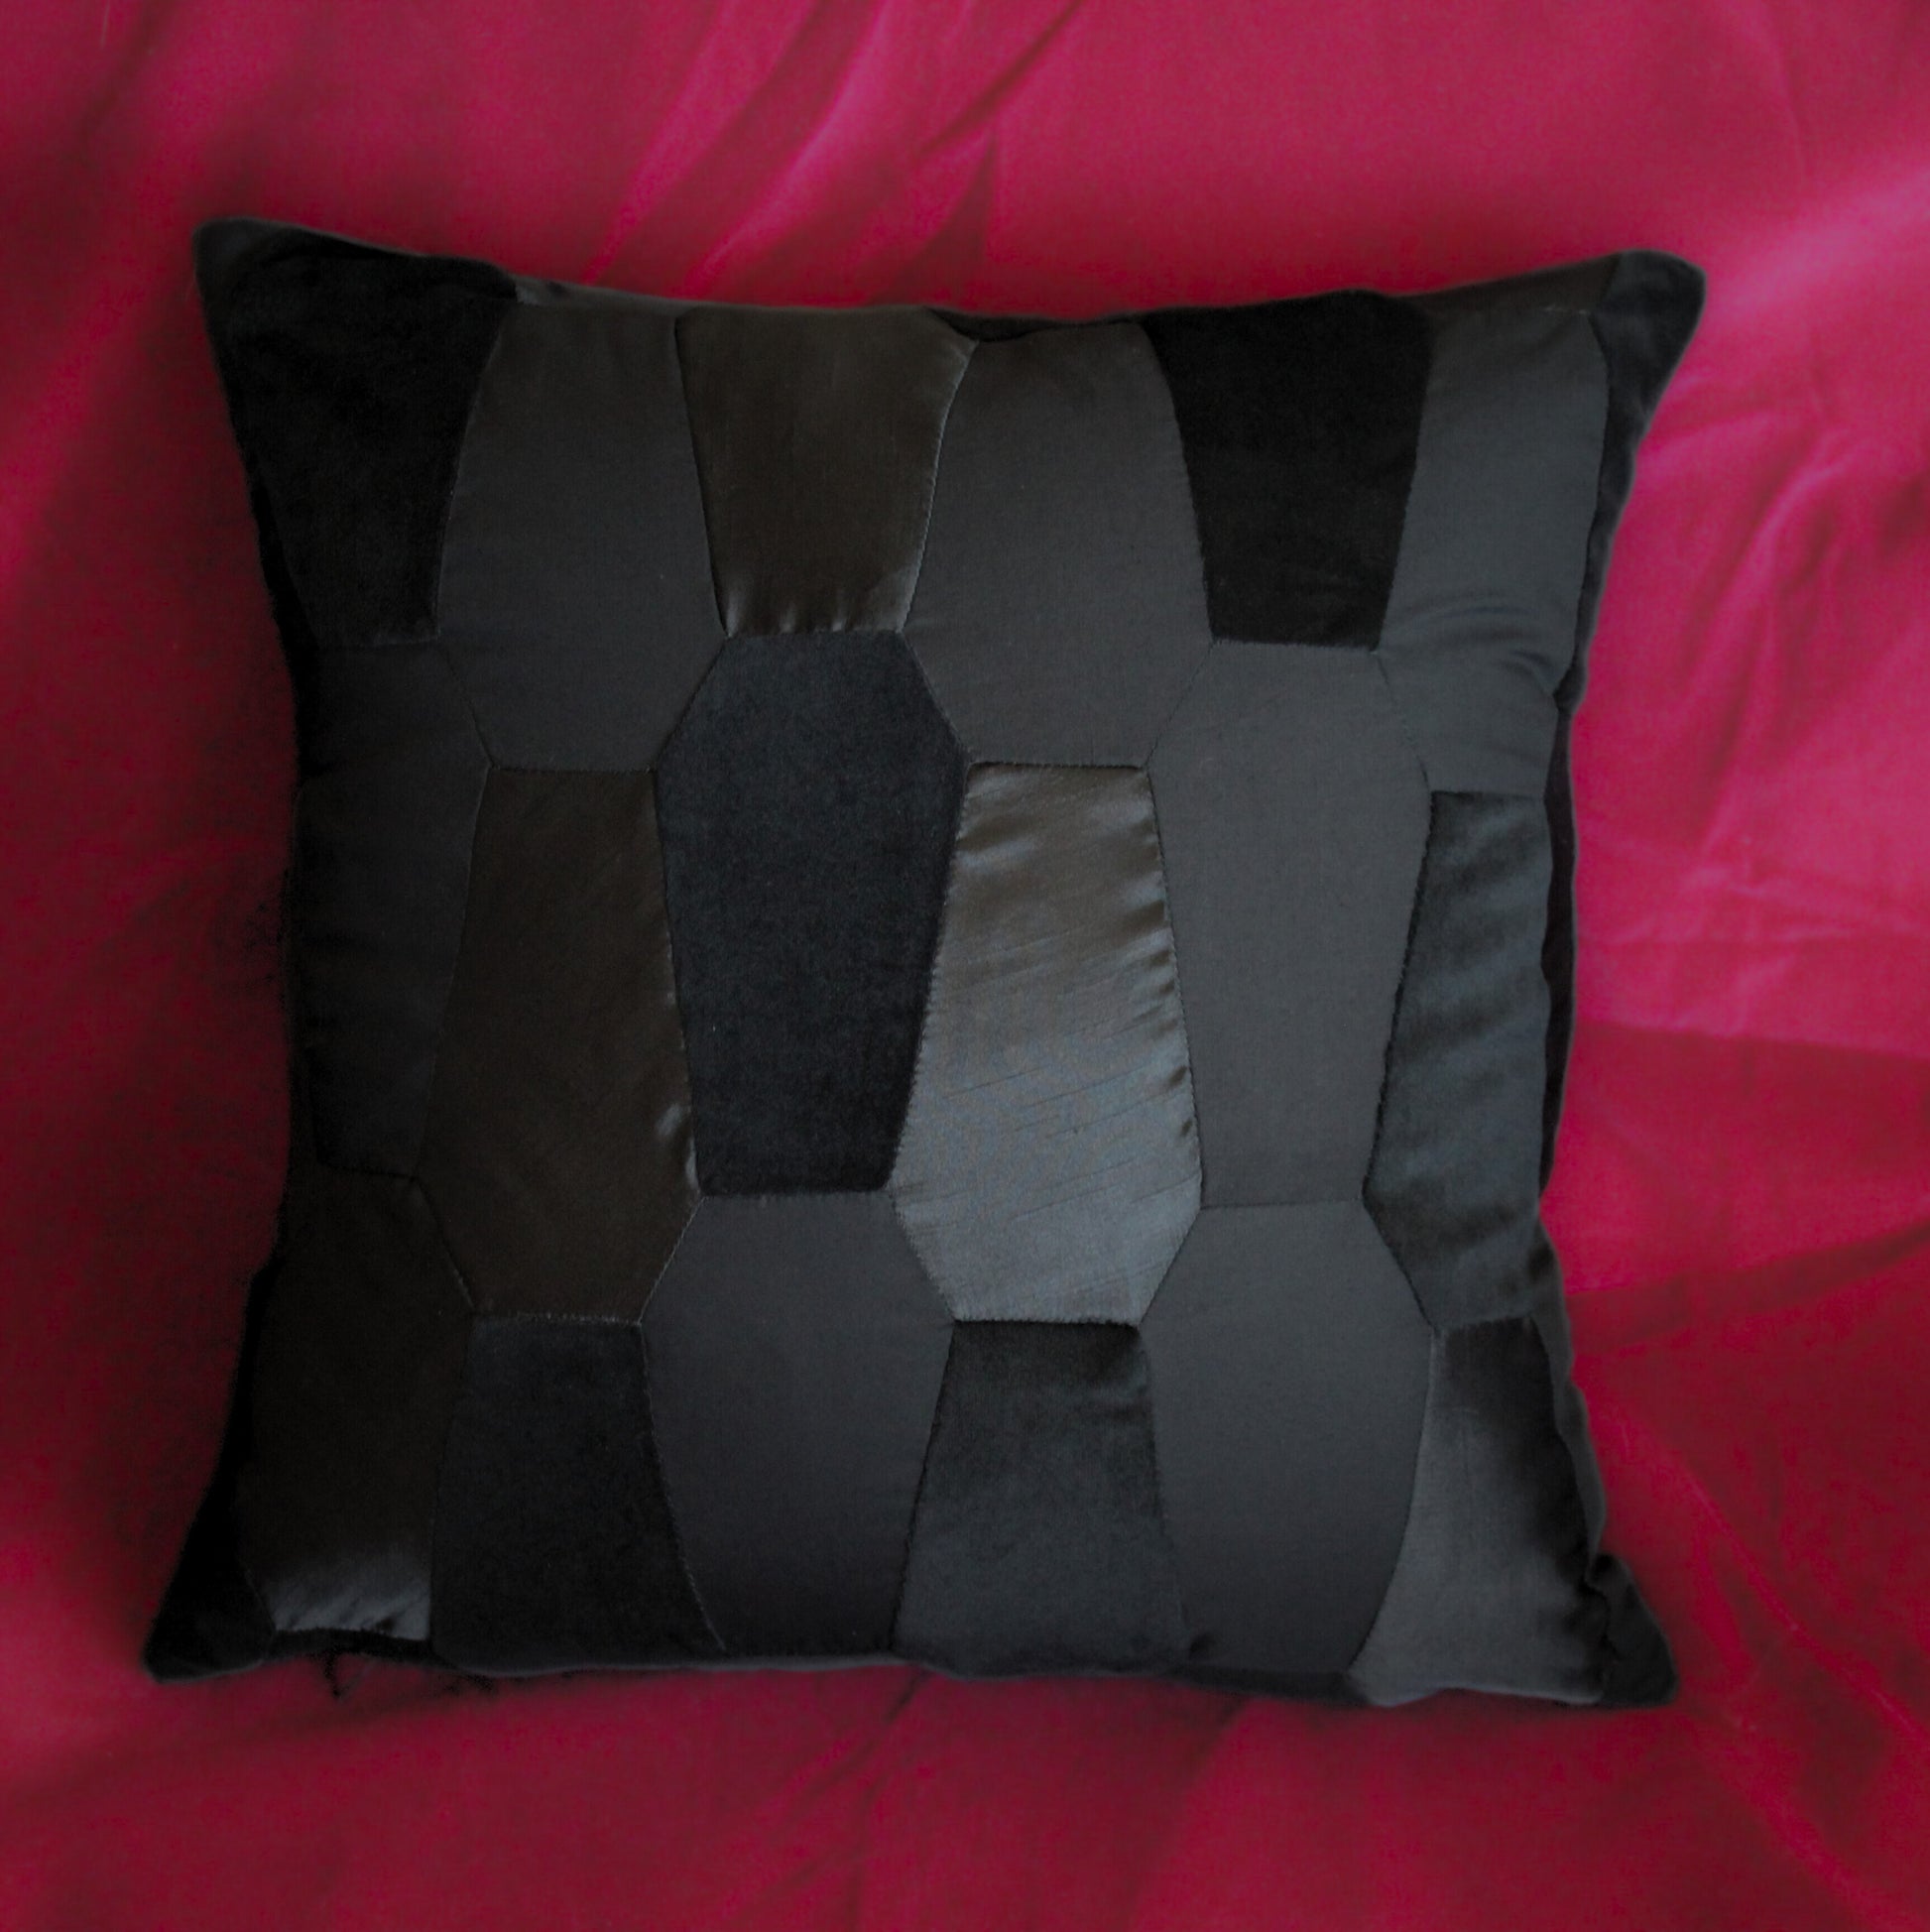 Black coffin patchwork cushion from Joely Ball Home on a red velvet background.